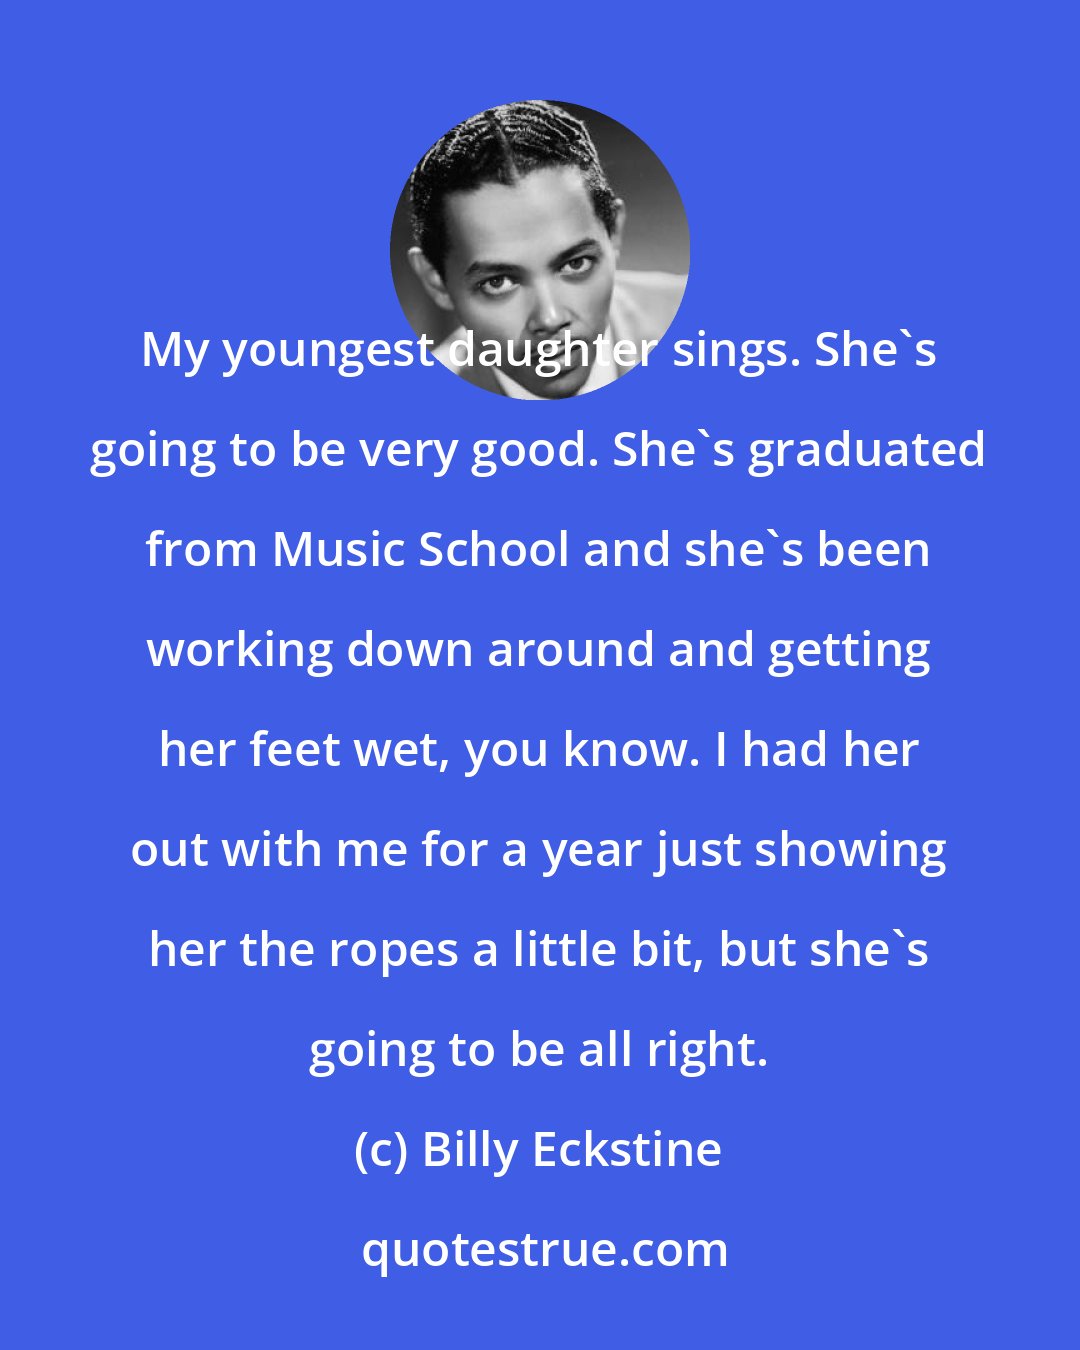 Billy Eckstine: My youngest daughter sings. She's going to be very good. She's graduated from Music School and she's been working down around and getting her feet wet, you know. I had her out with me for a year just showing her the ropes a little bit, but she's going to be all right.